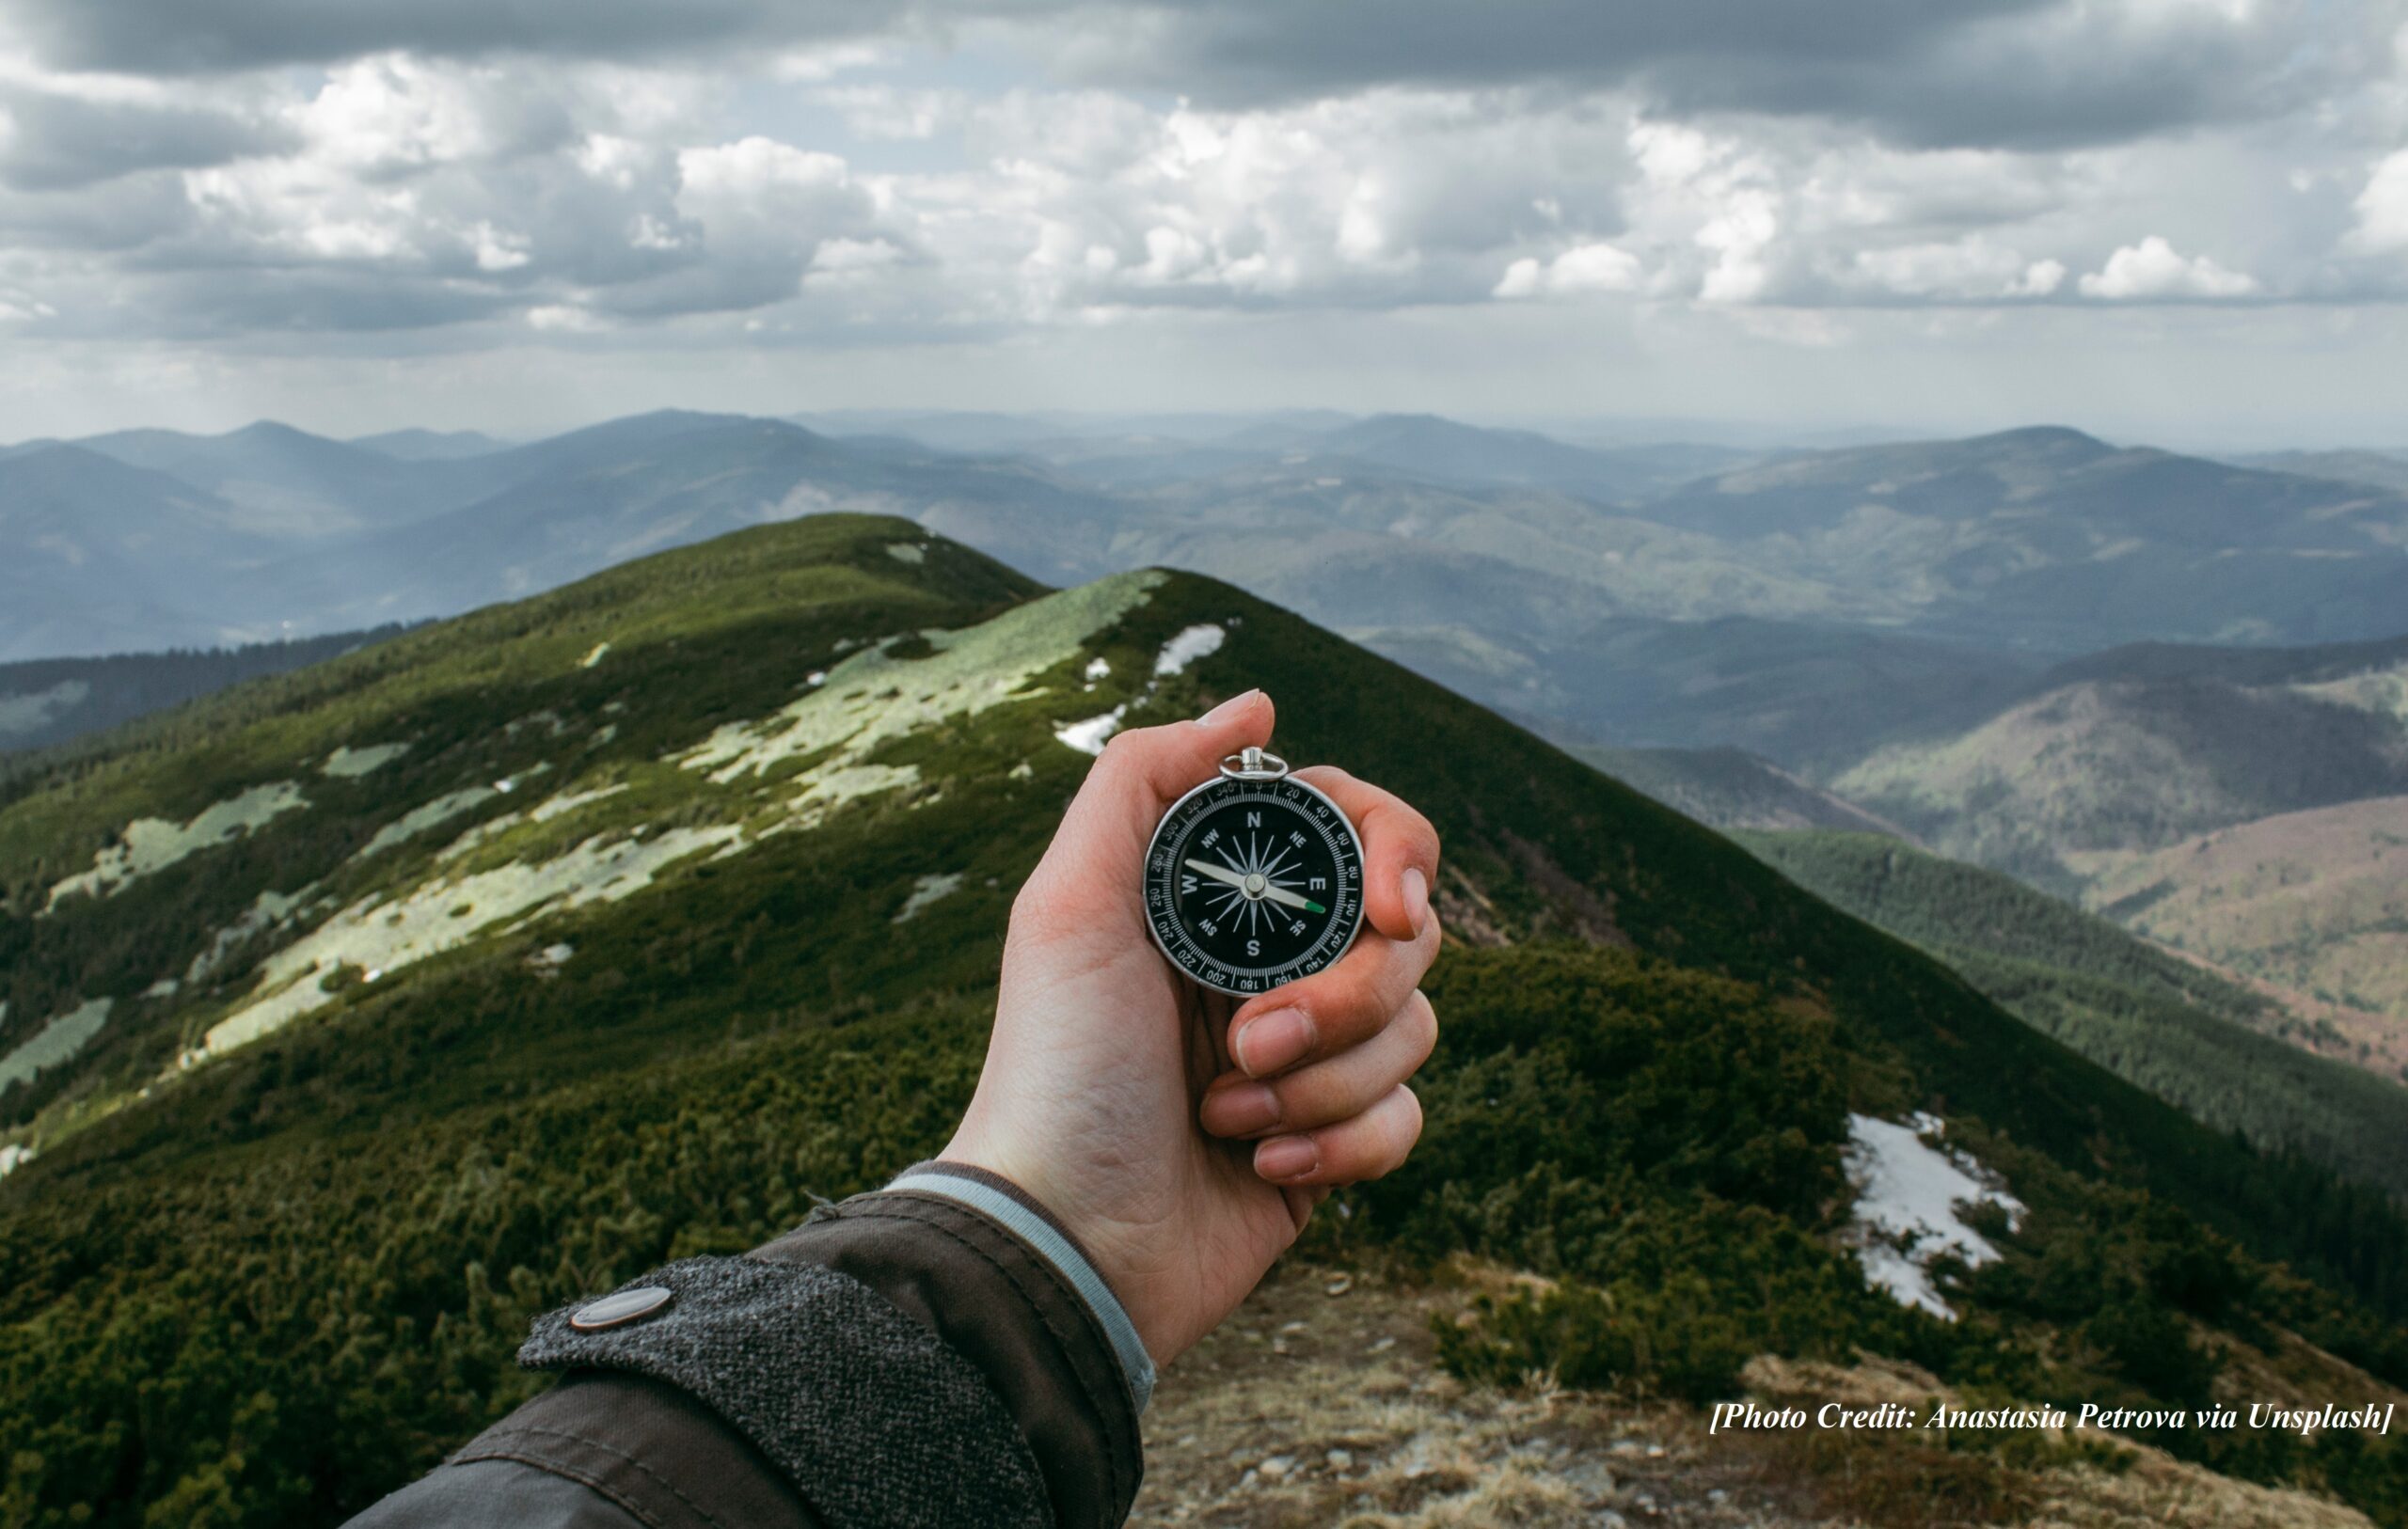 hand holding a compass in front of a green mountain-range